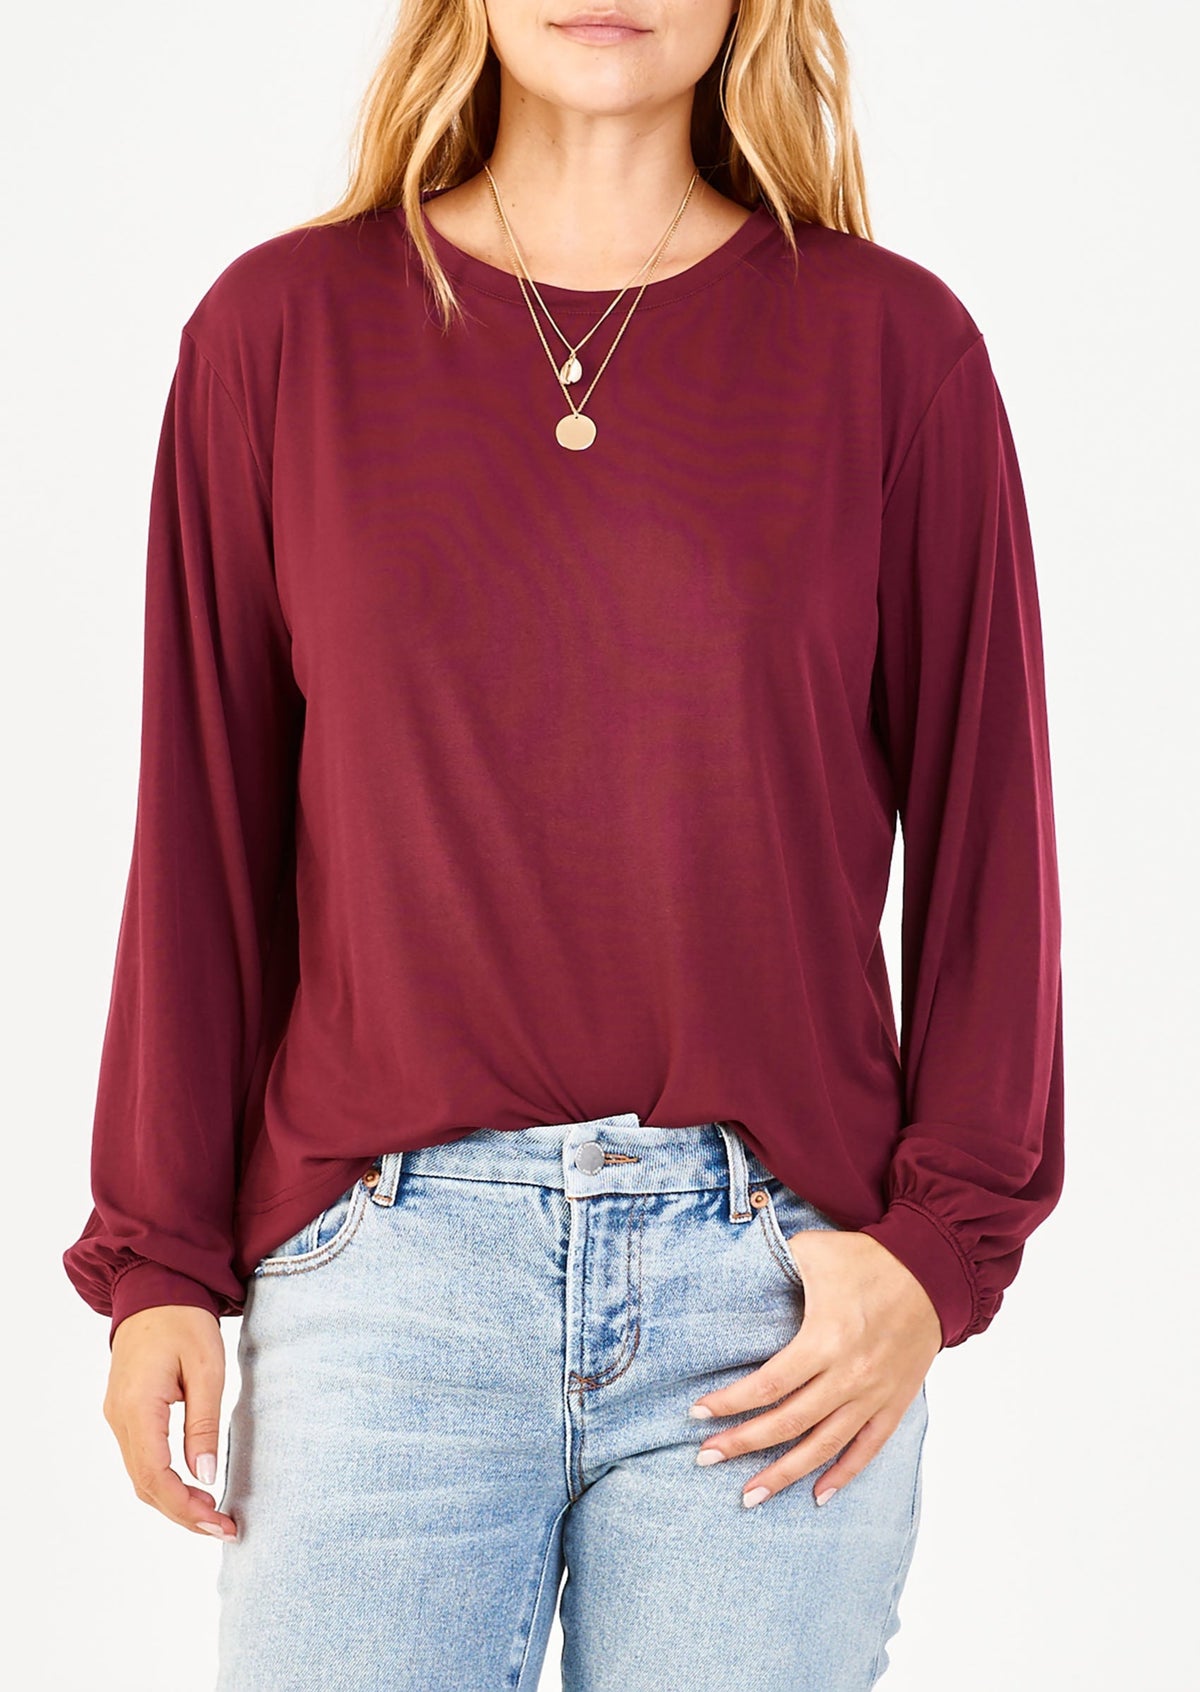 matilda-basic-long-sleeve-top-tawny-port-front-image-another-love-clothing